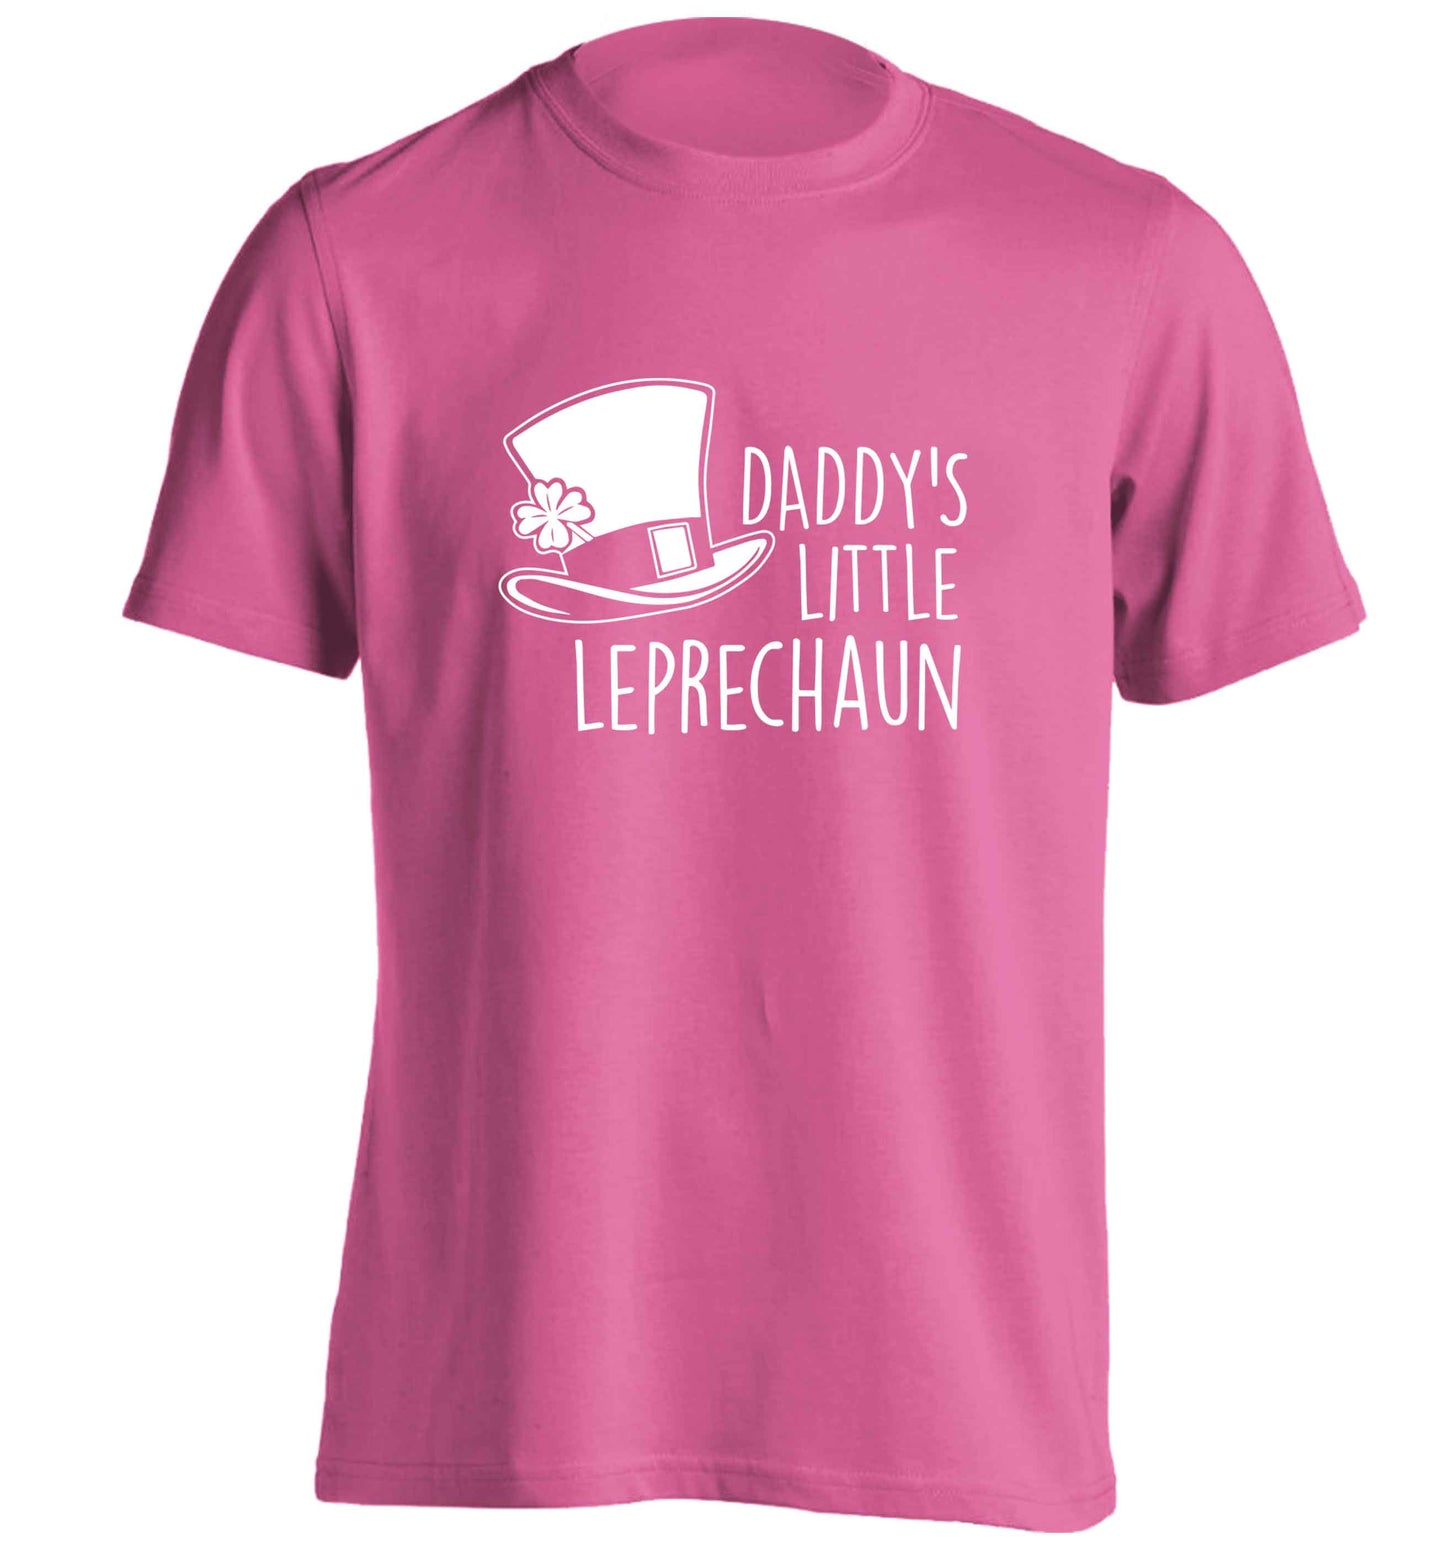 Daddy's lucky charm adults unisex pink Tshirt 2XL